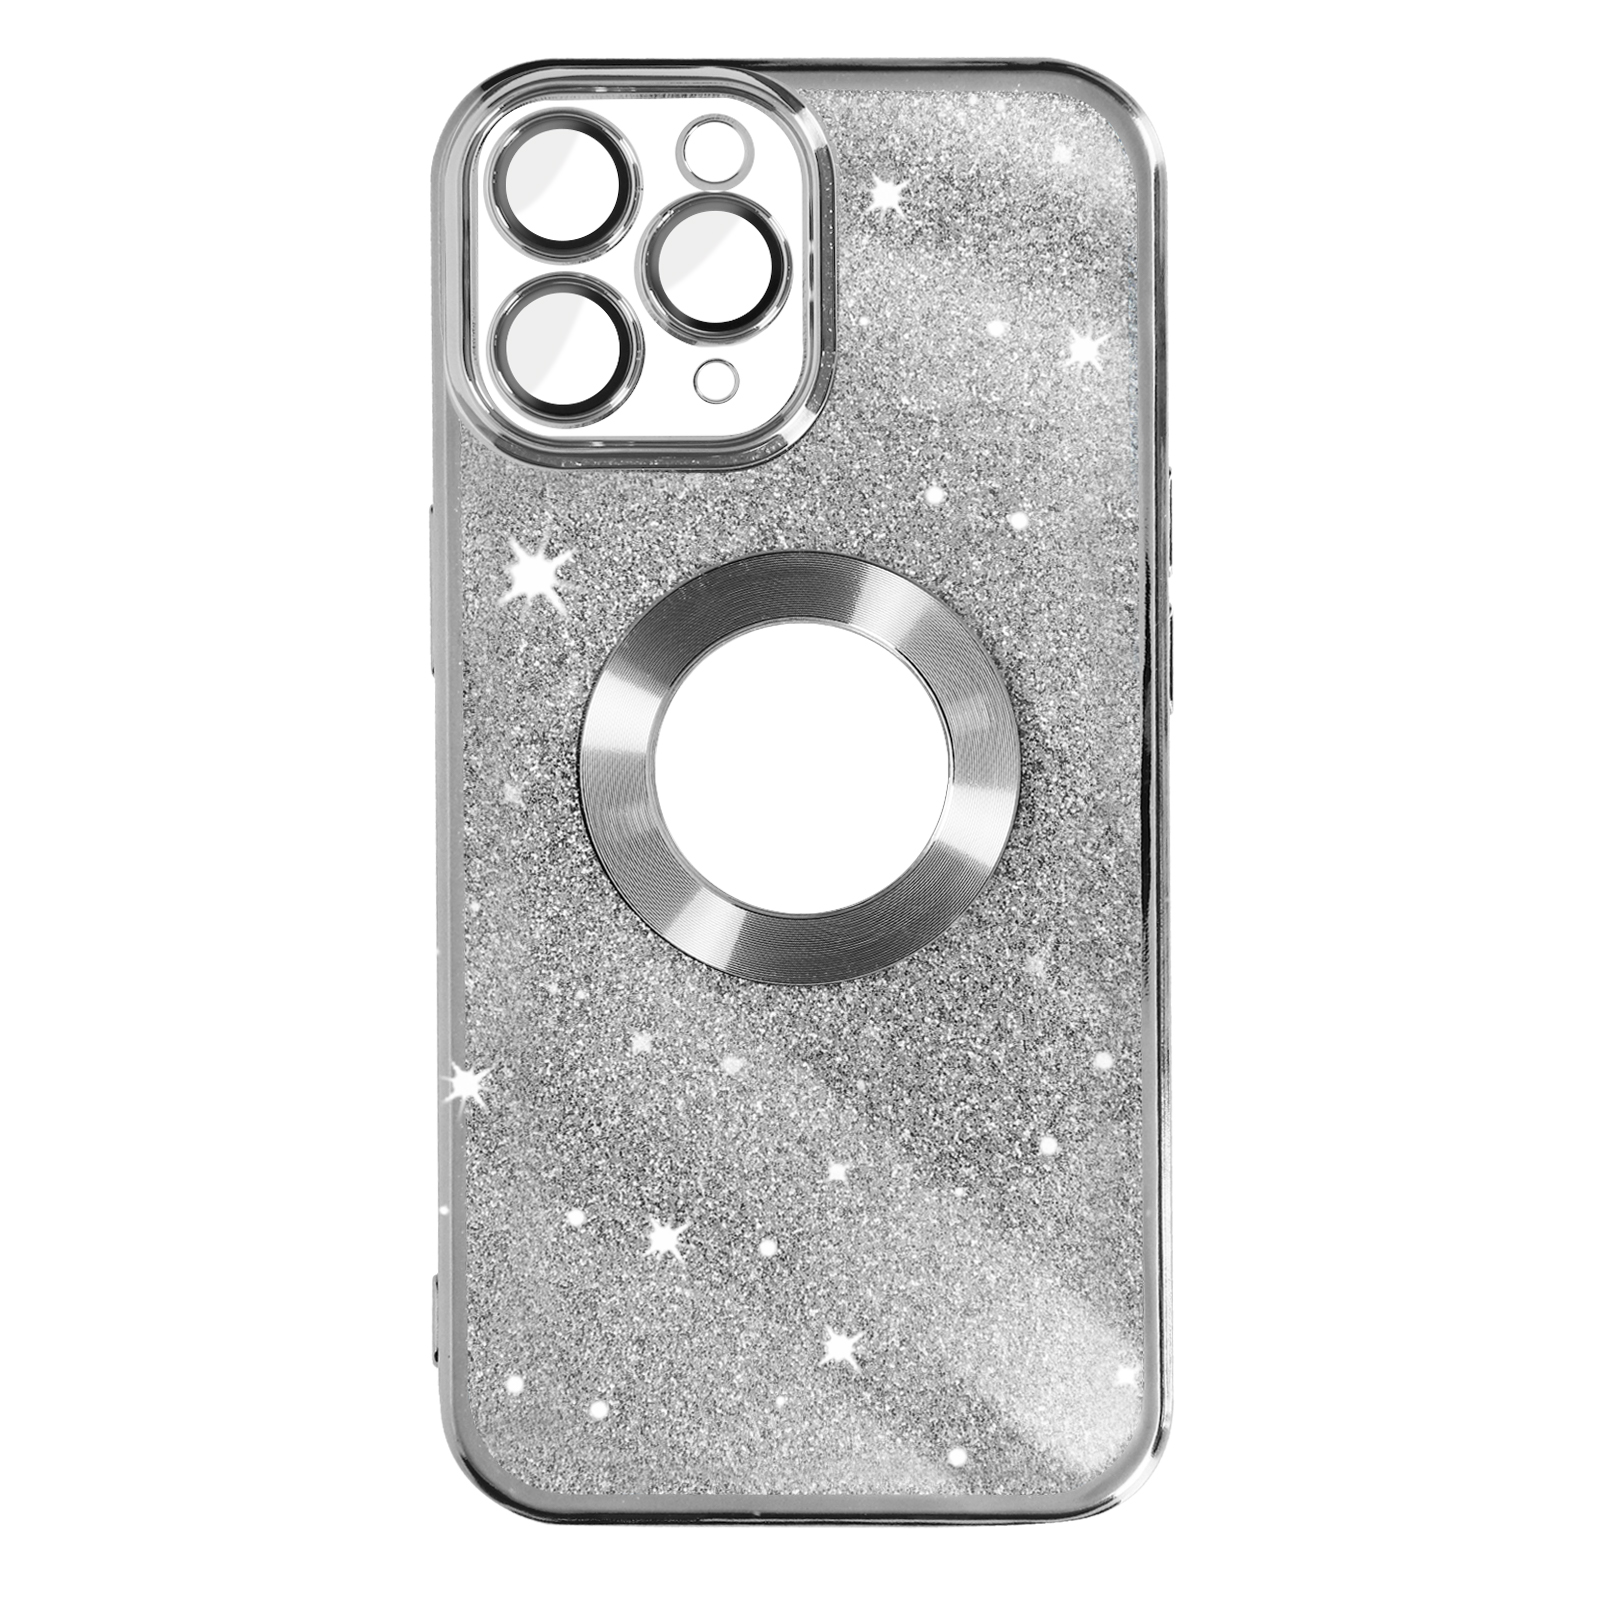 iPhone Spark Backcover, Pro Series, 11 Silber Protecam Max, Apple, AVIZAR